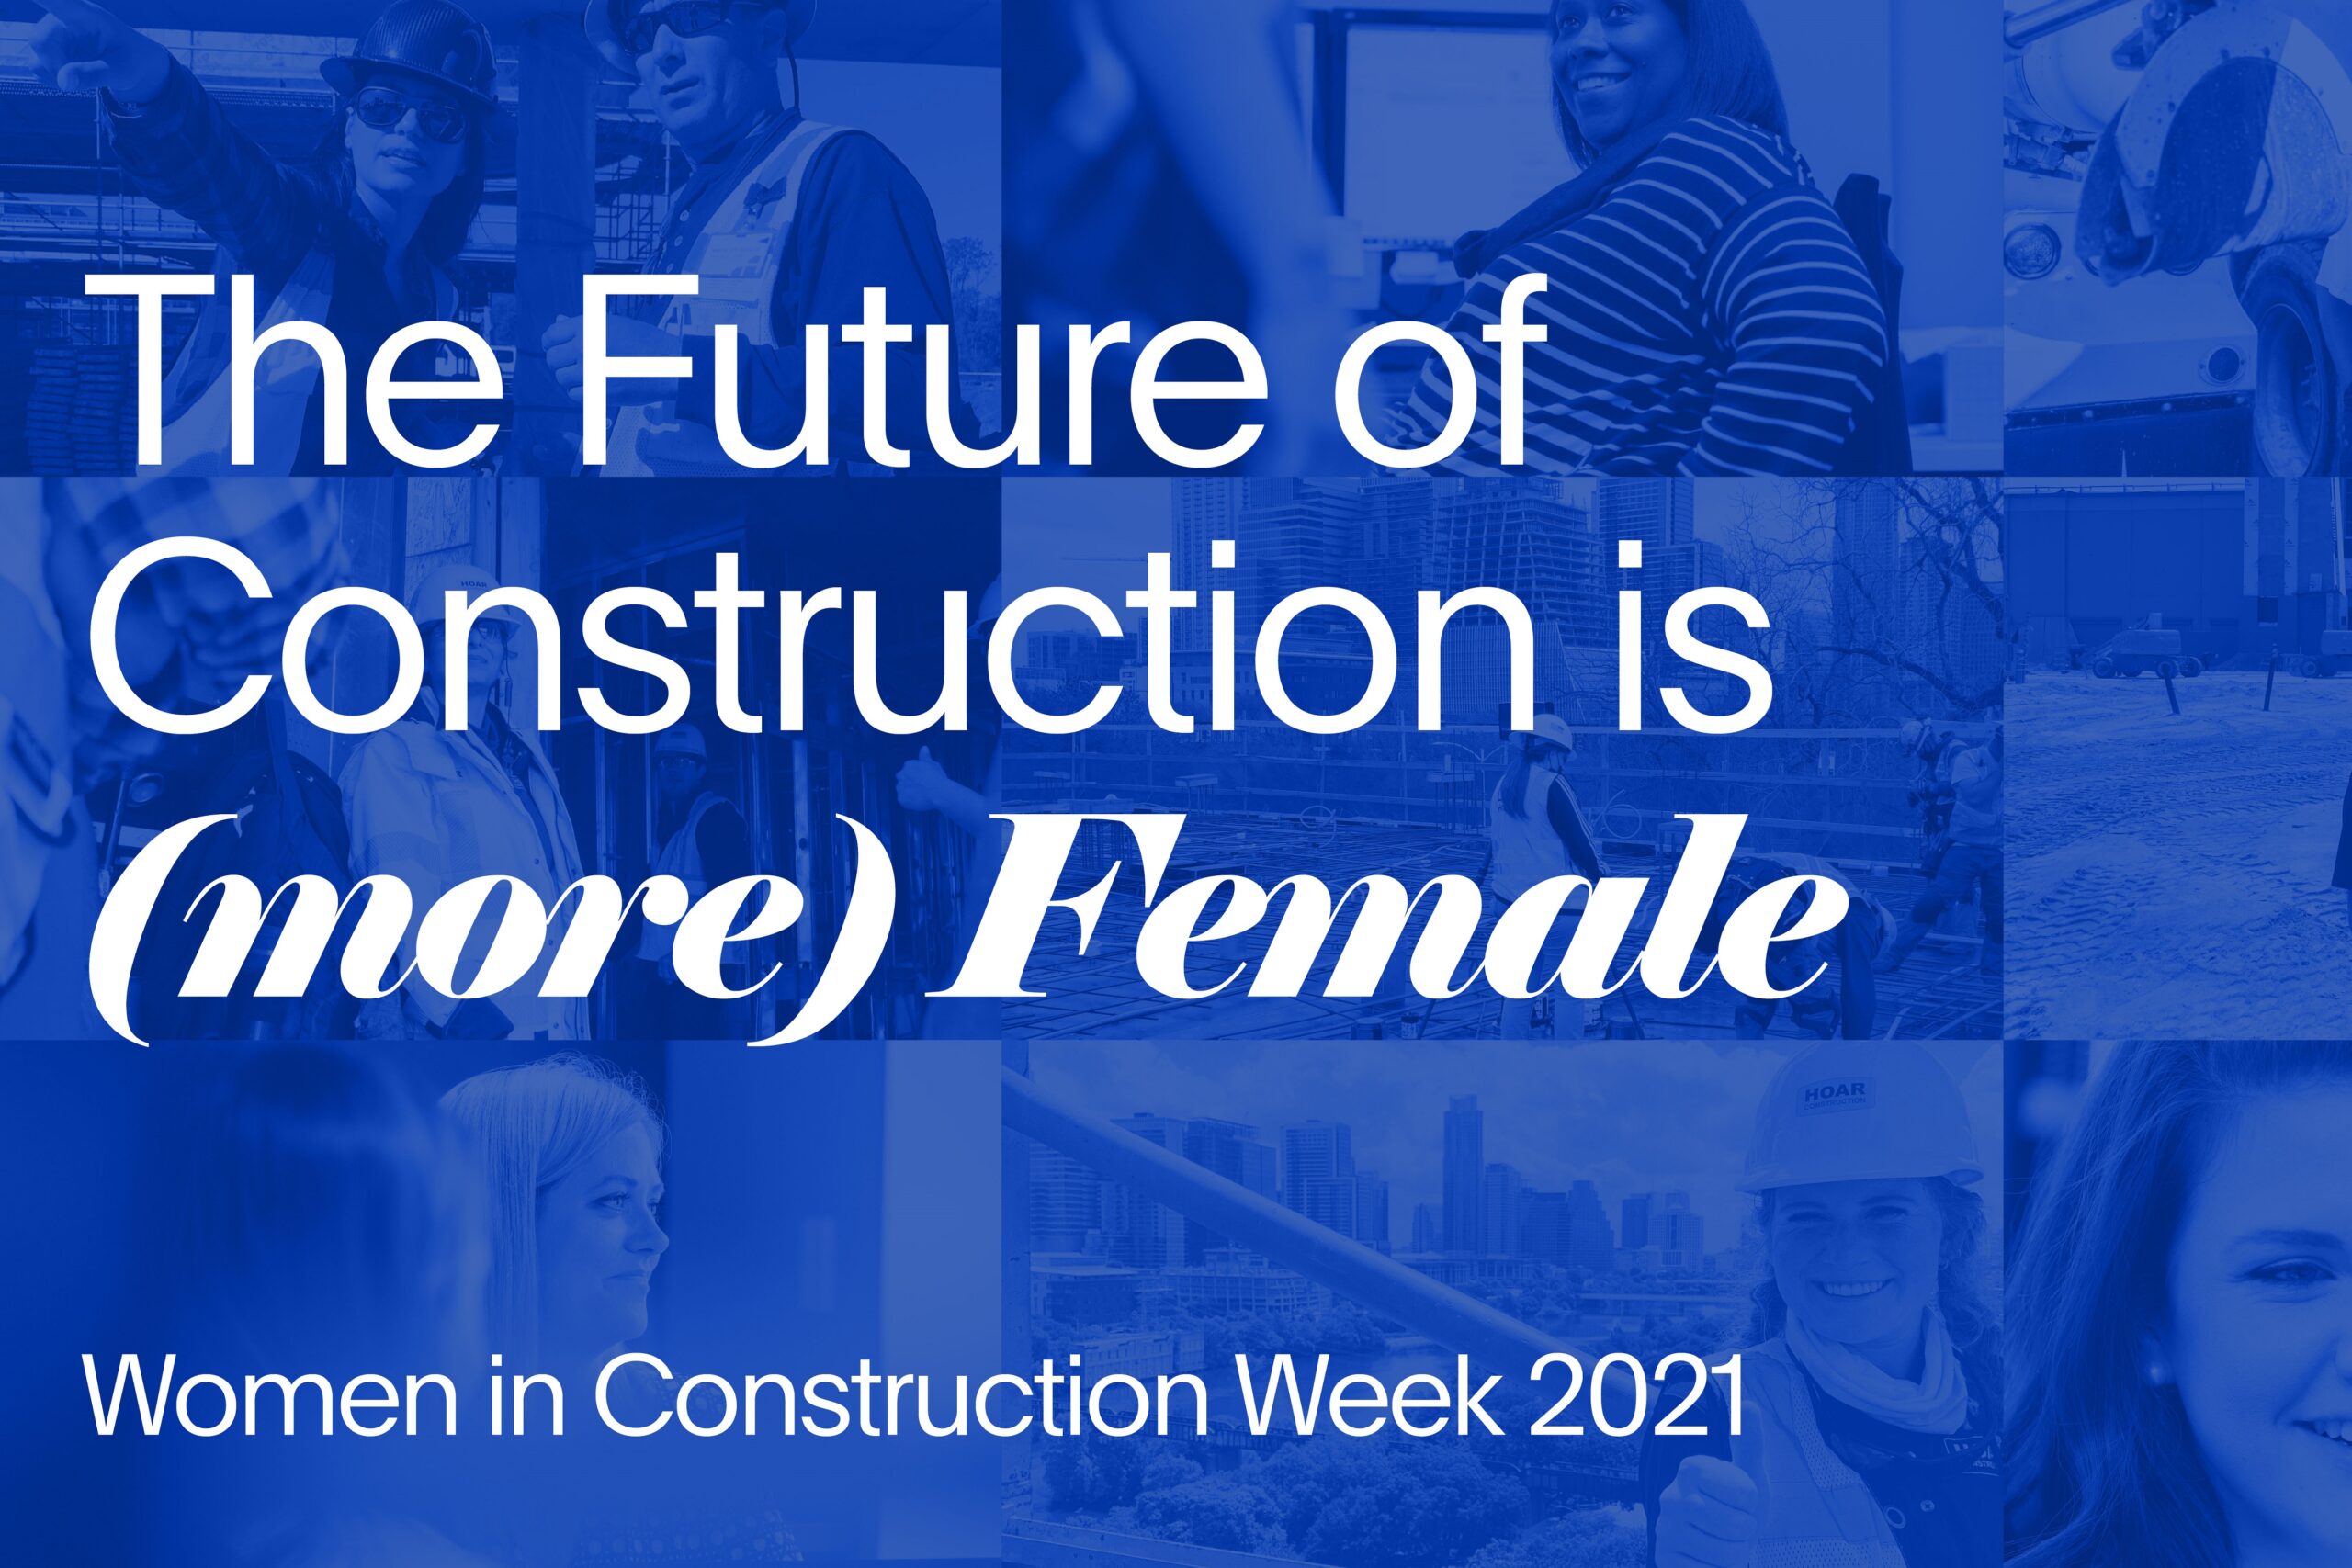 The Future of Construction is (More) Female